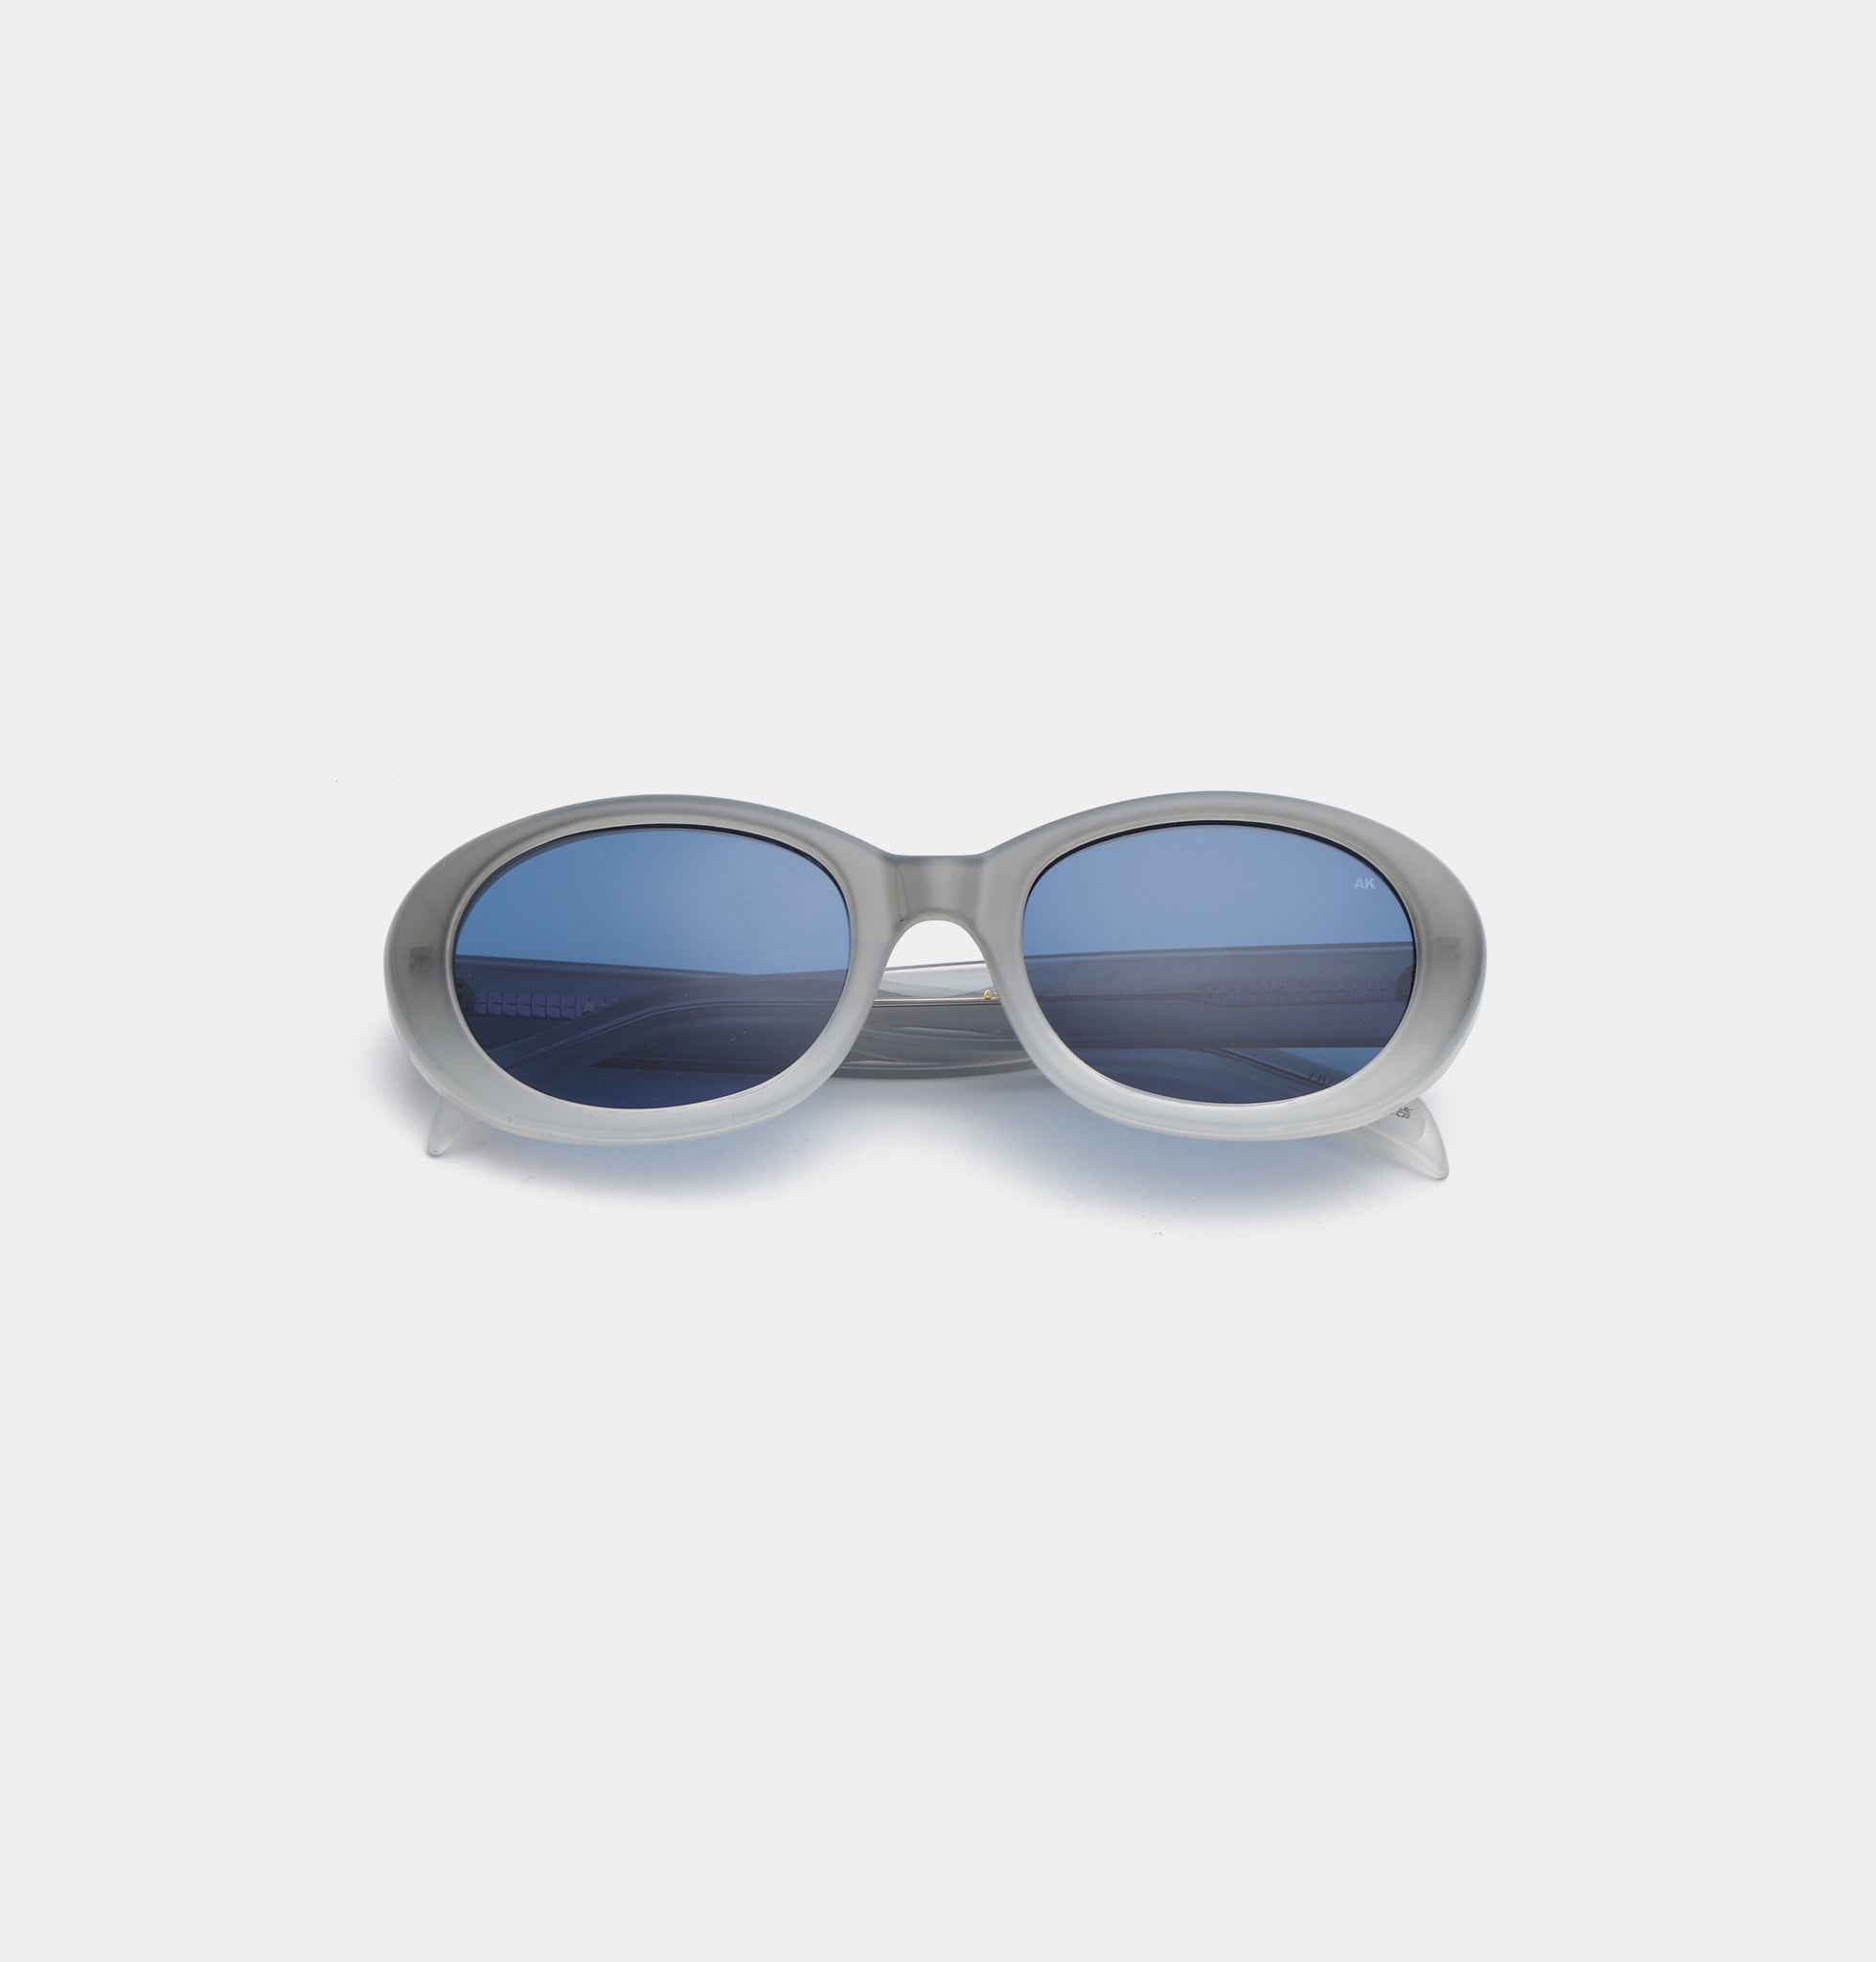 Anma sunglasses in glaucus grey/light grey